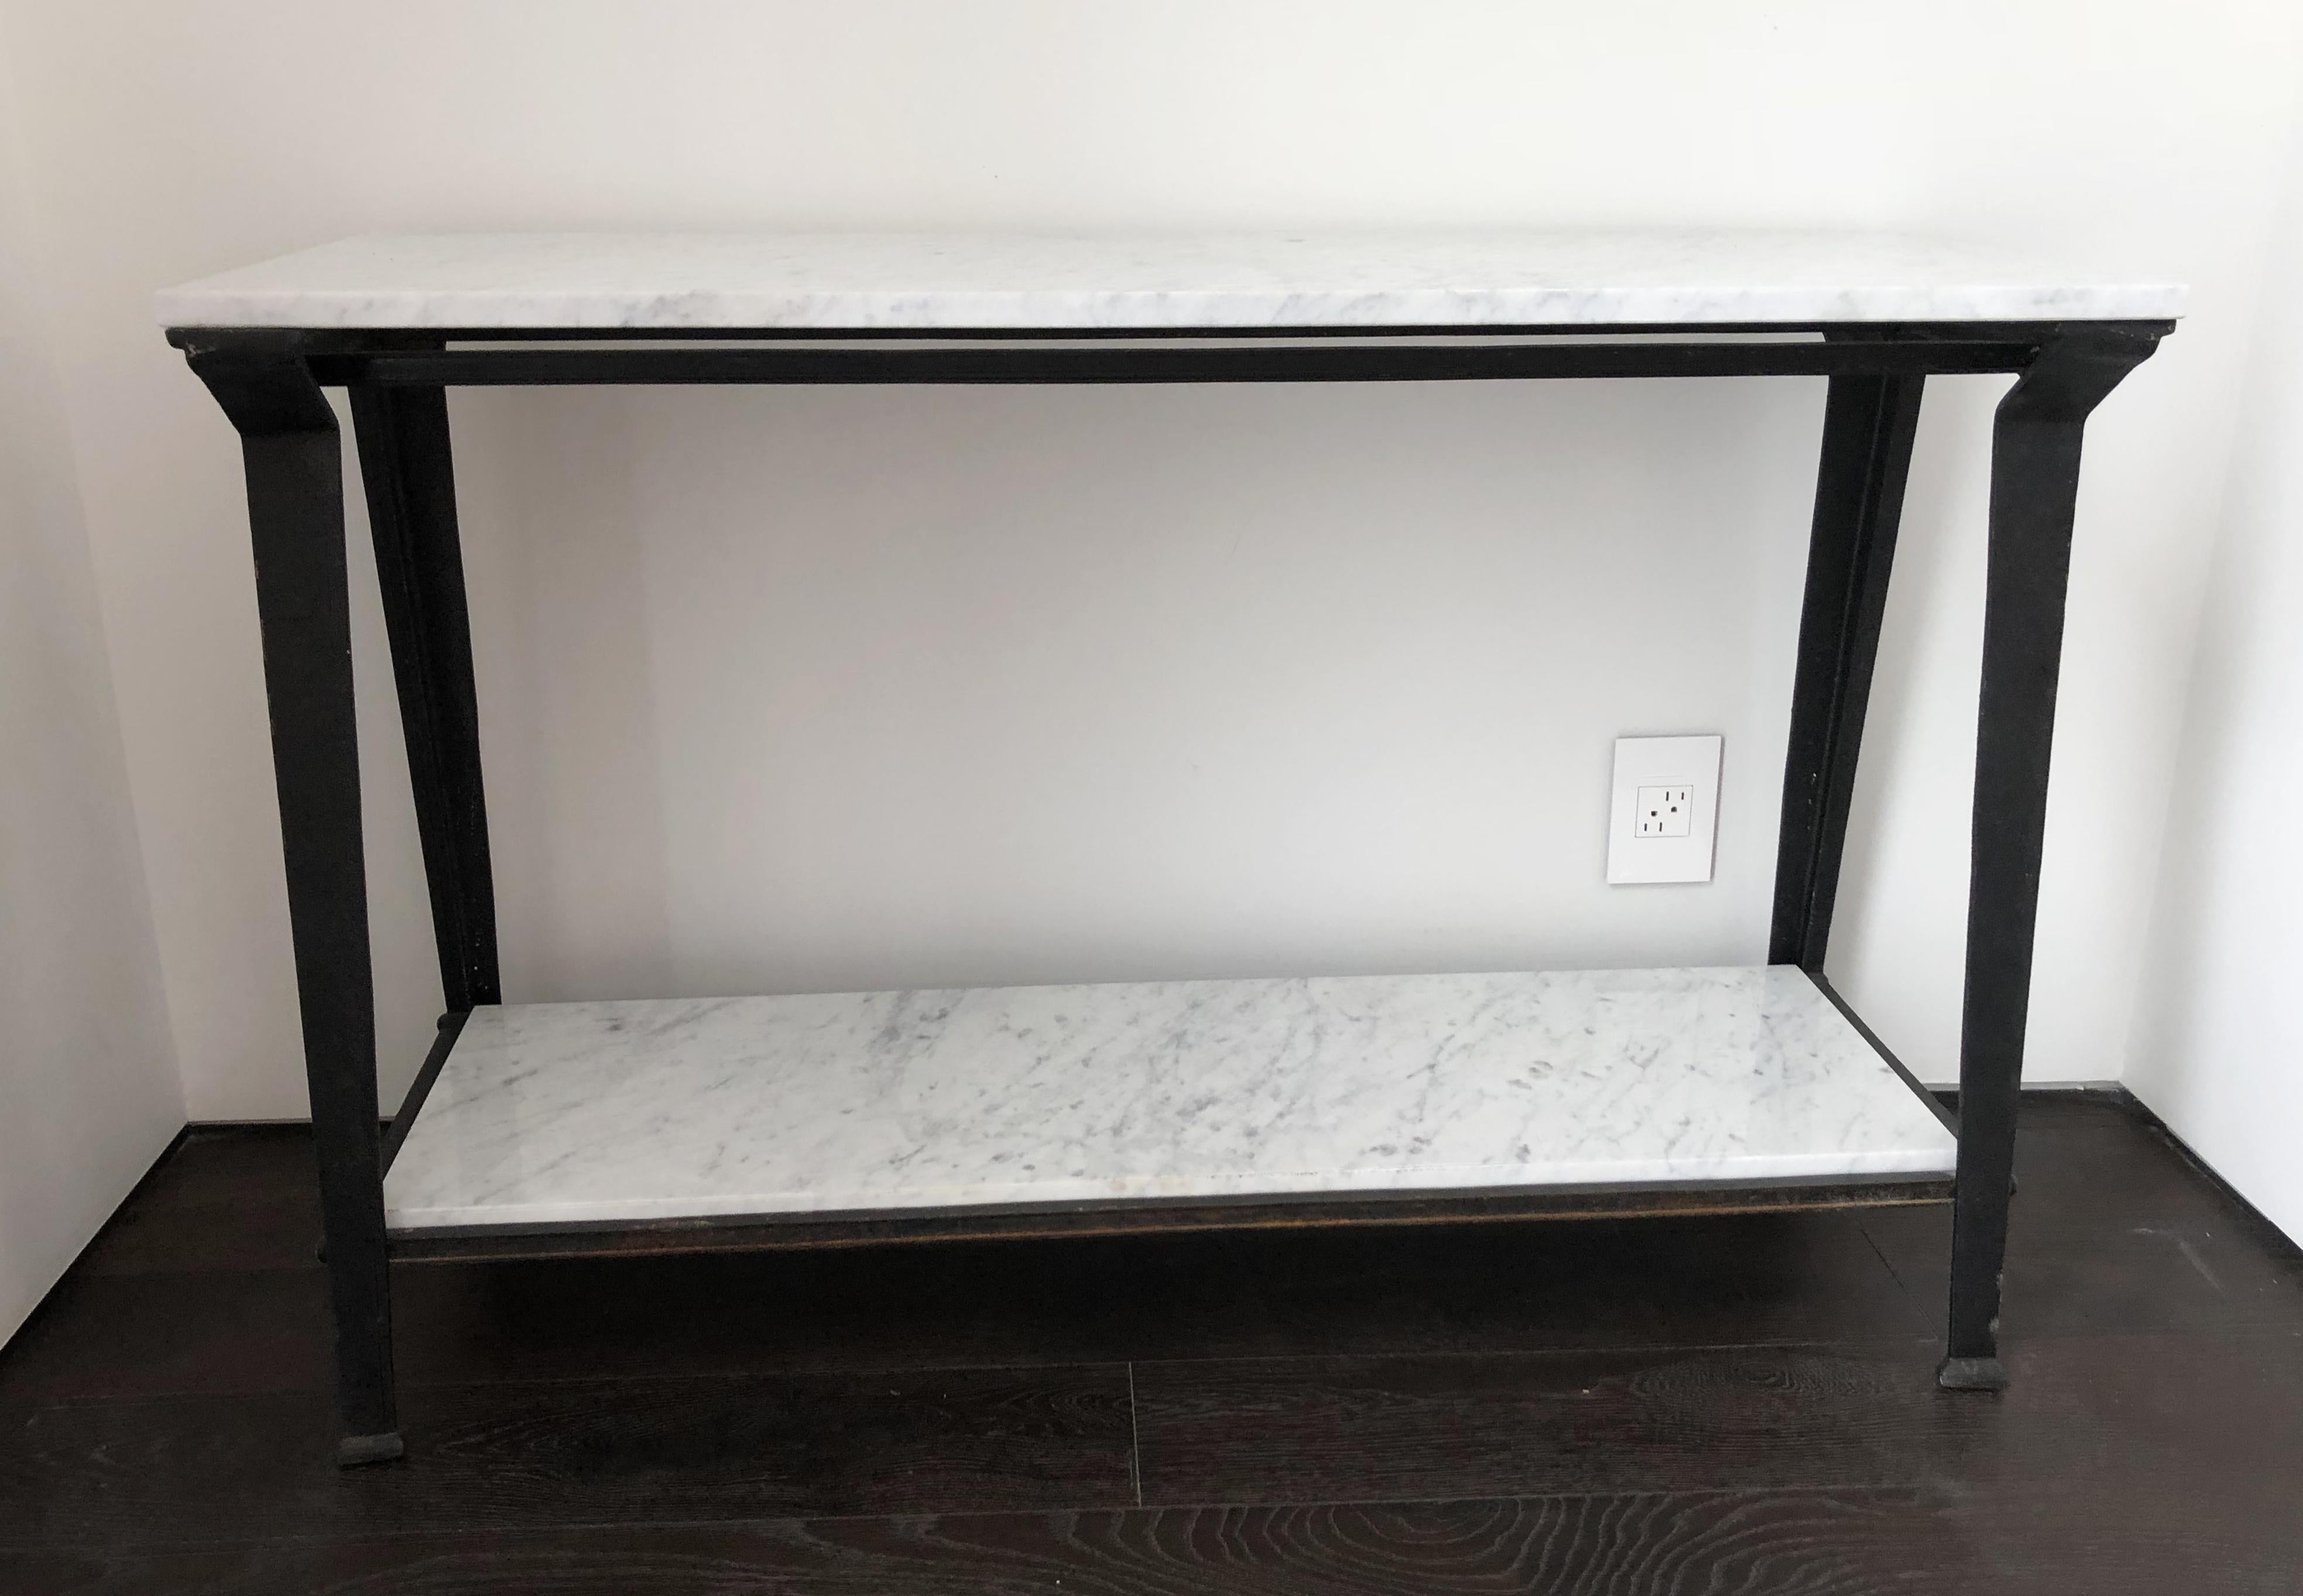 Beautiful Industrial Design, great architectural lines and perfect for any setting.
The marble compliments the metal base very well.
Measurements:
45